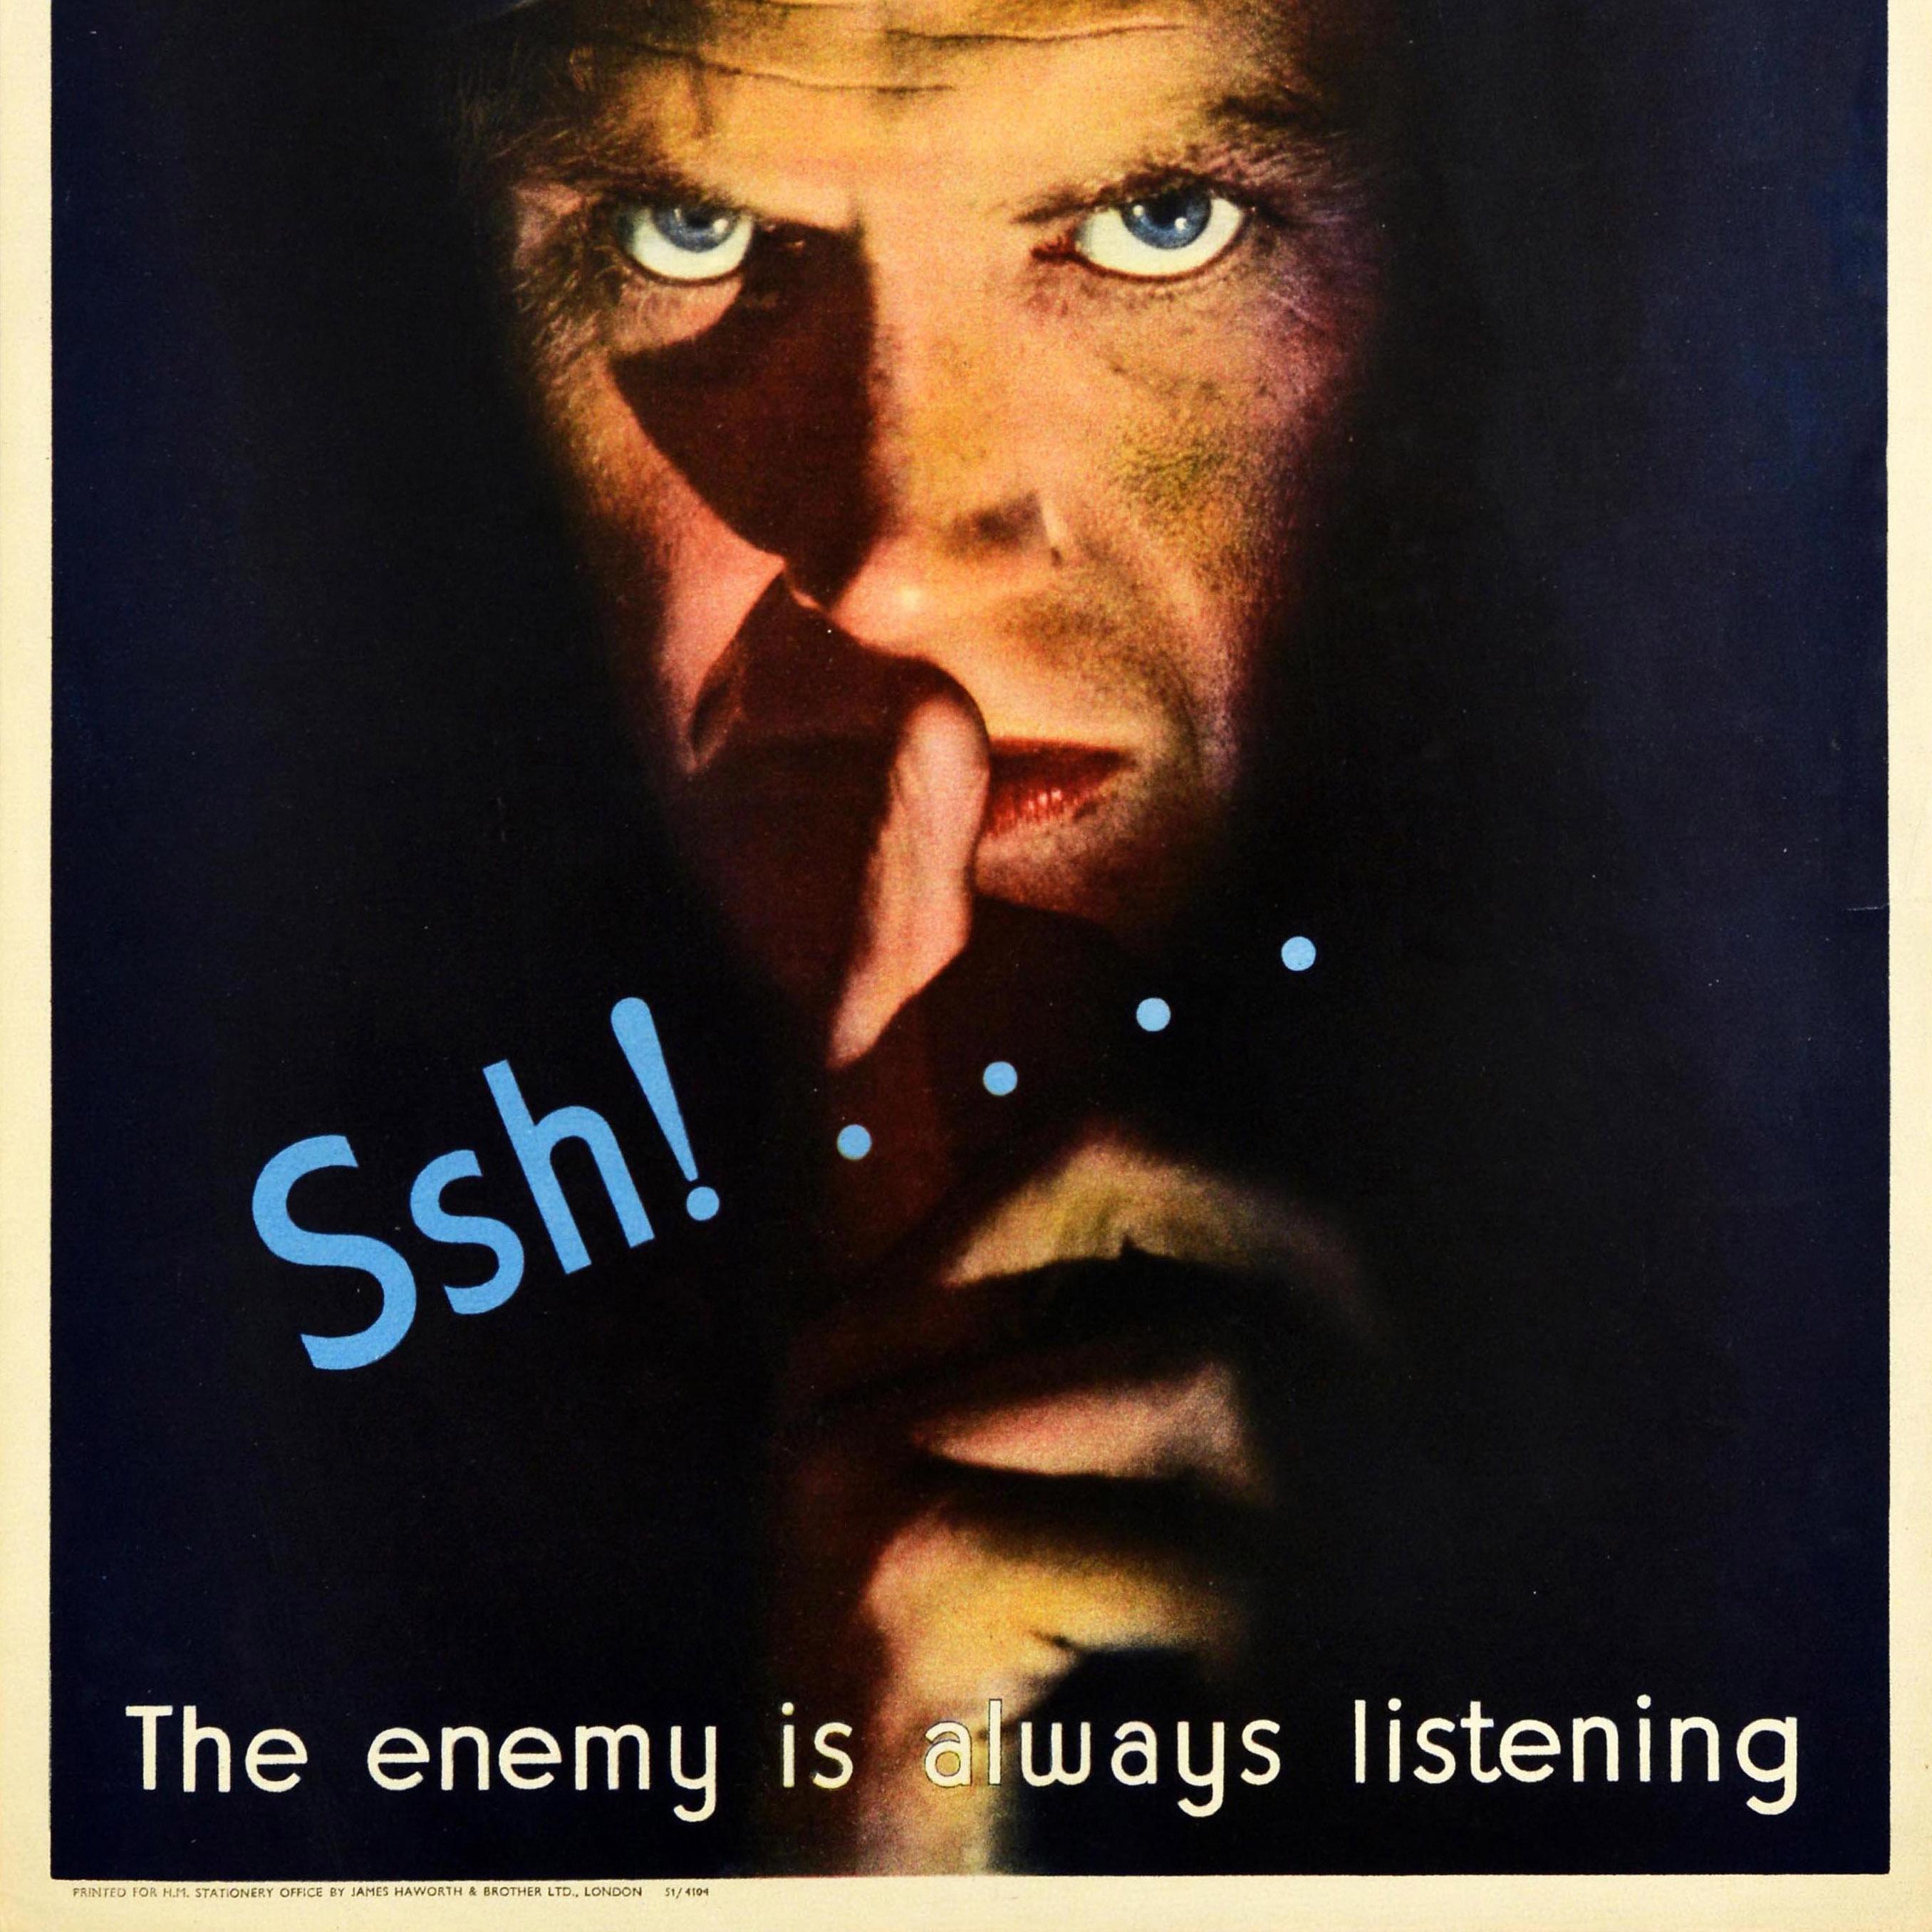 enemy poster